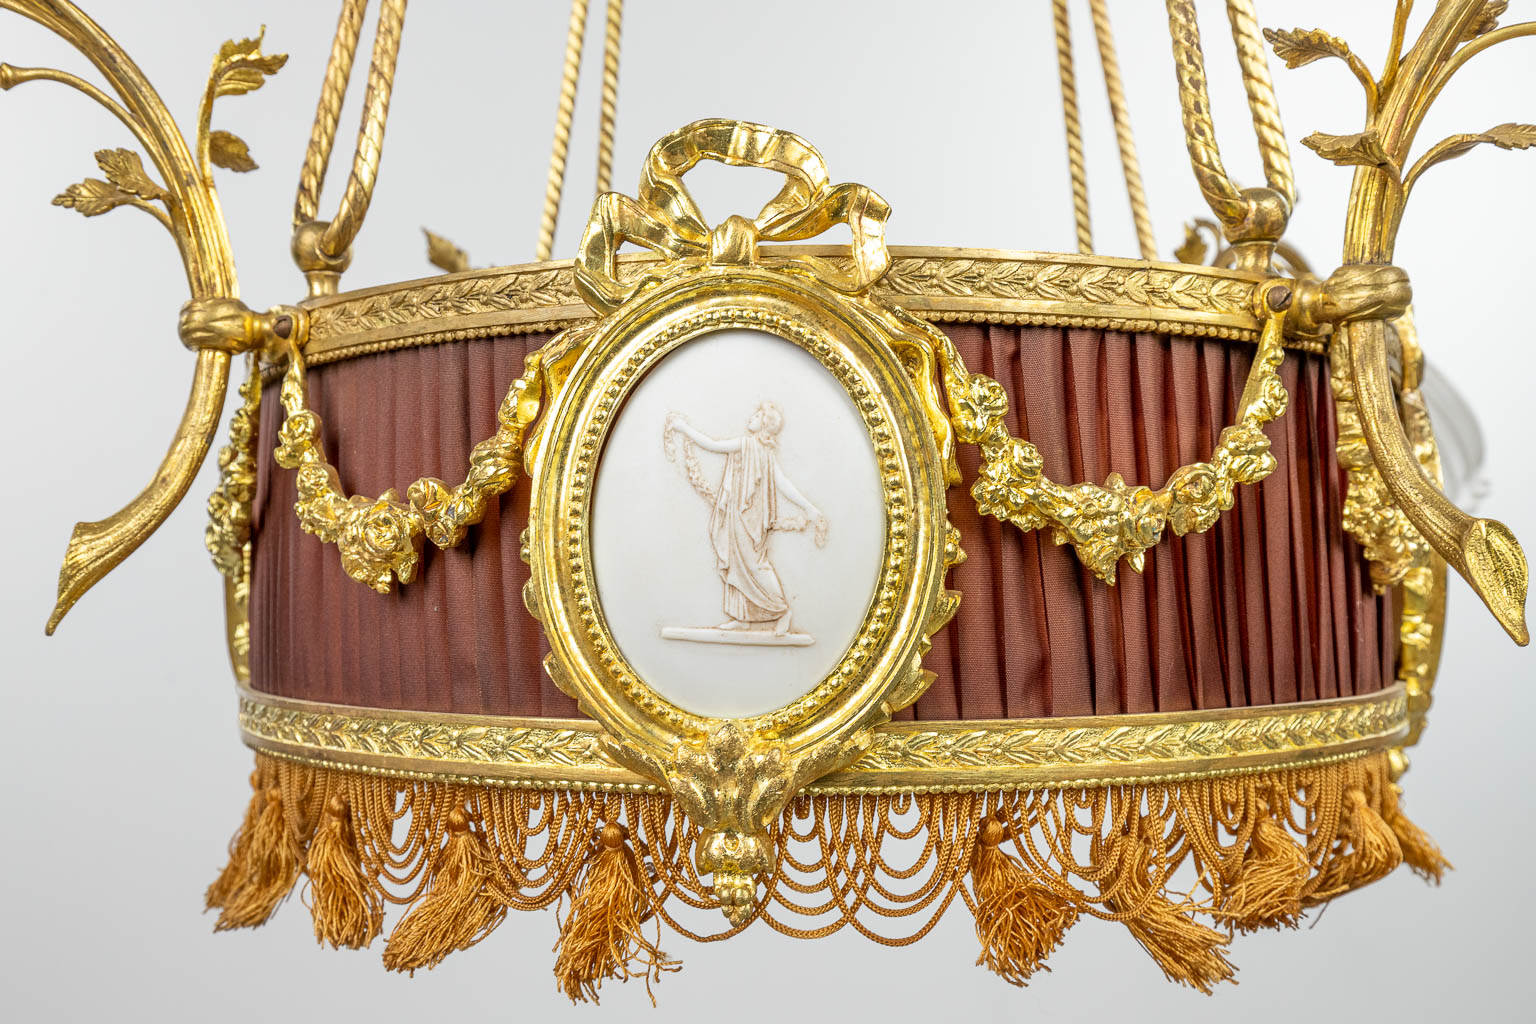 A chandelier made of bronze in Louis XVI style and finished with bisque plaques. (H:100cm)